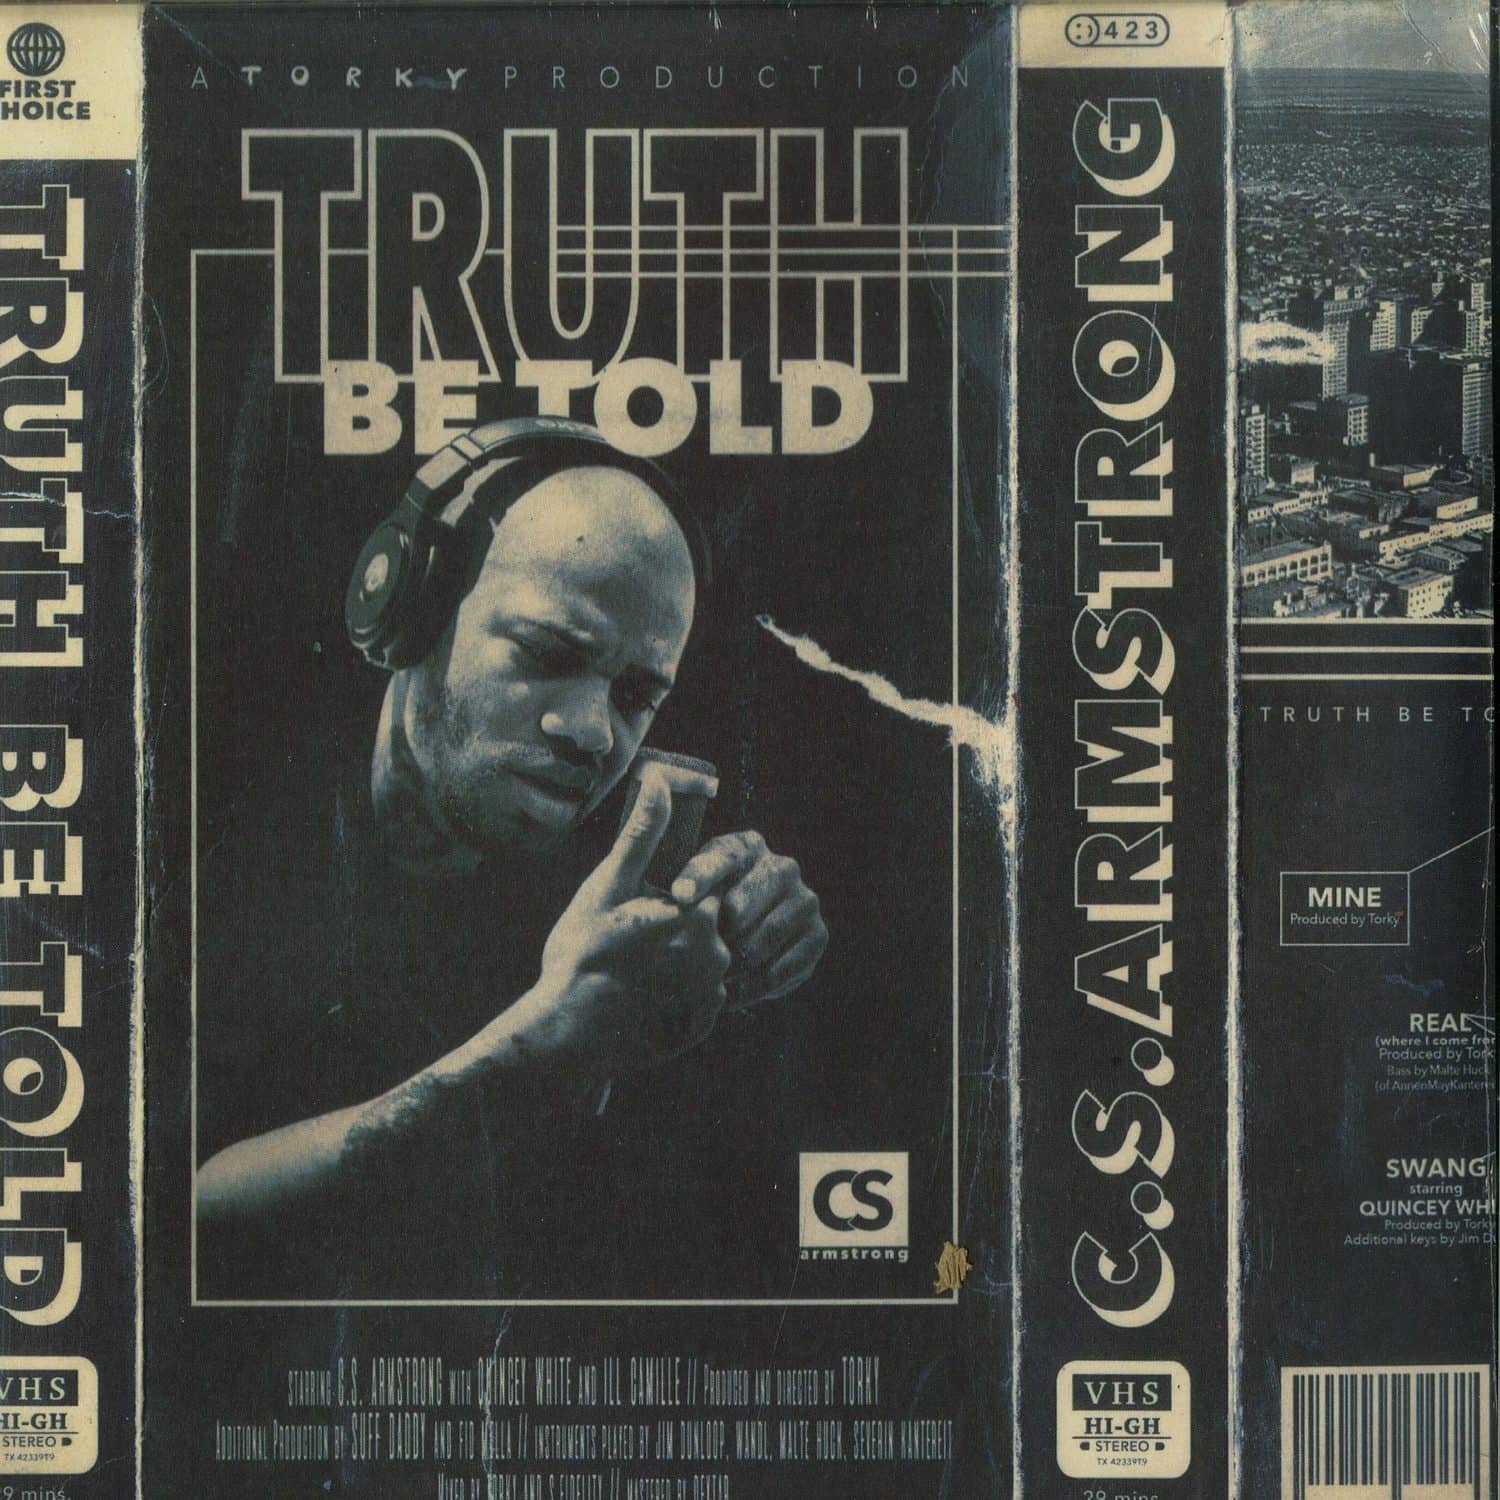 C.S.Armstrong - TRUTH BE TOLD 